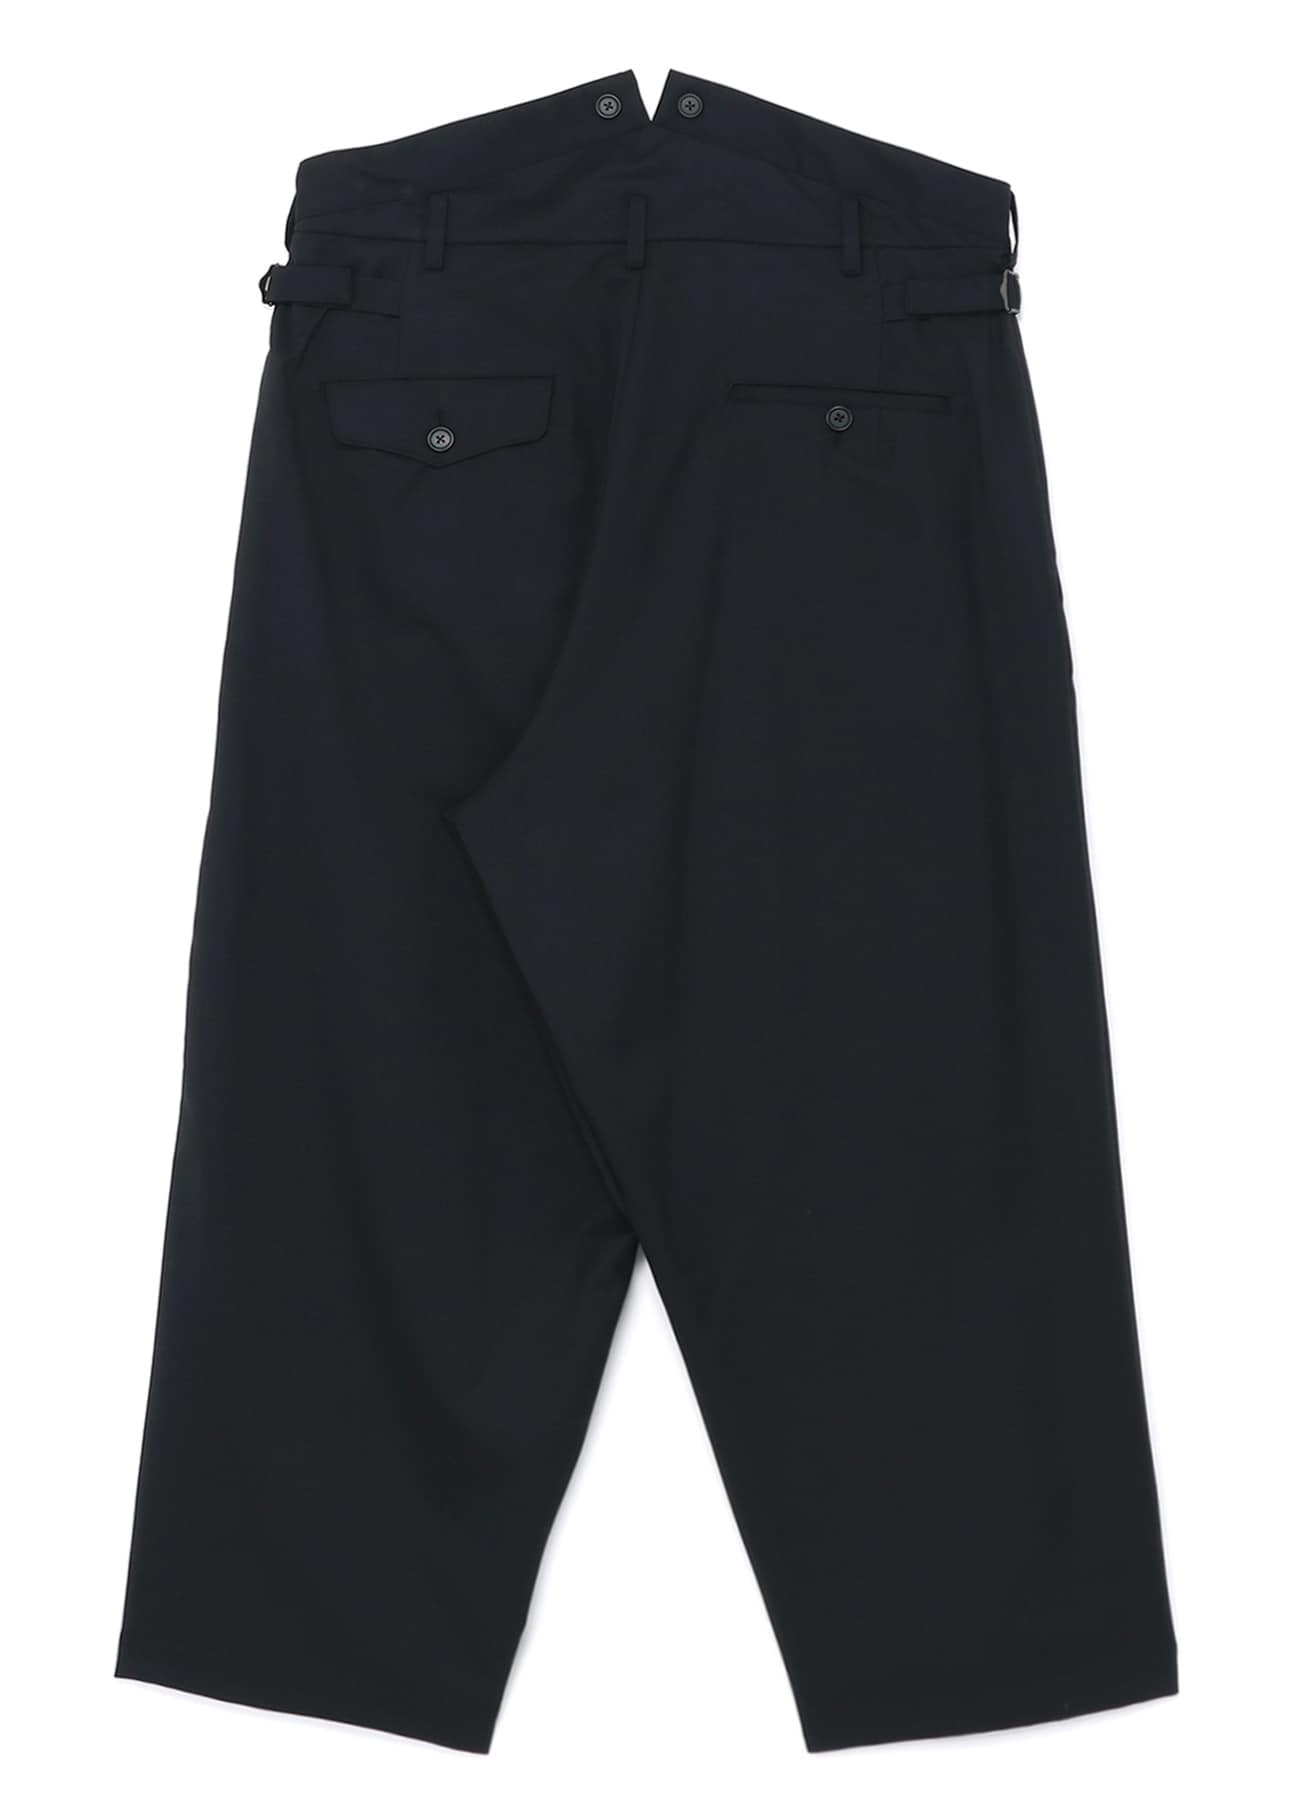 T/W GABARDINE SUSPENDER PANTS WITH TRIANGLE GUSSET